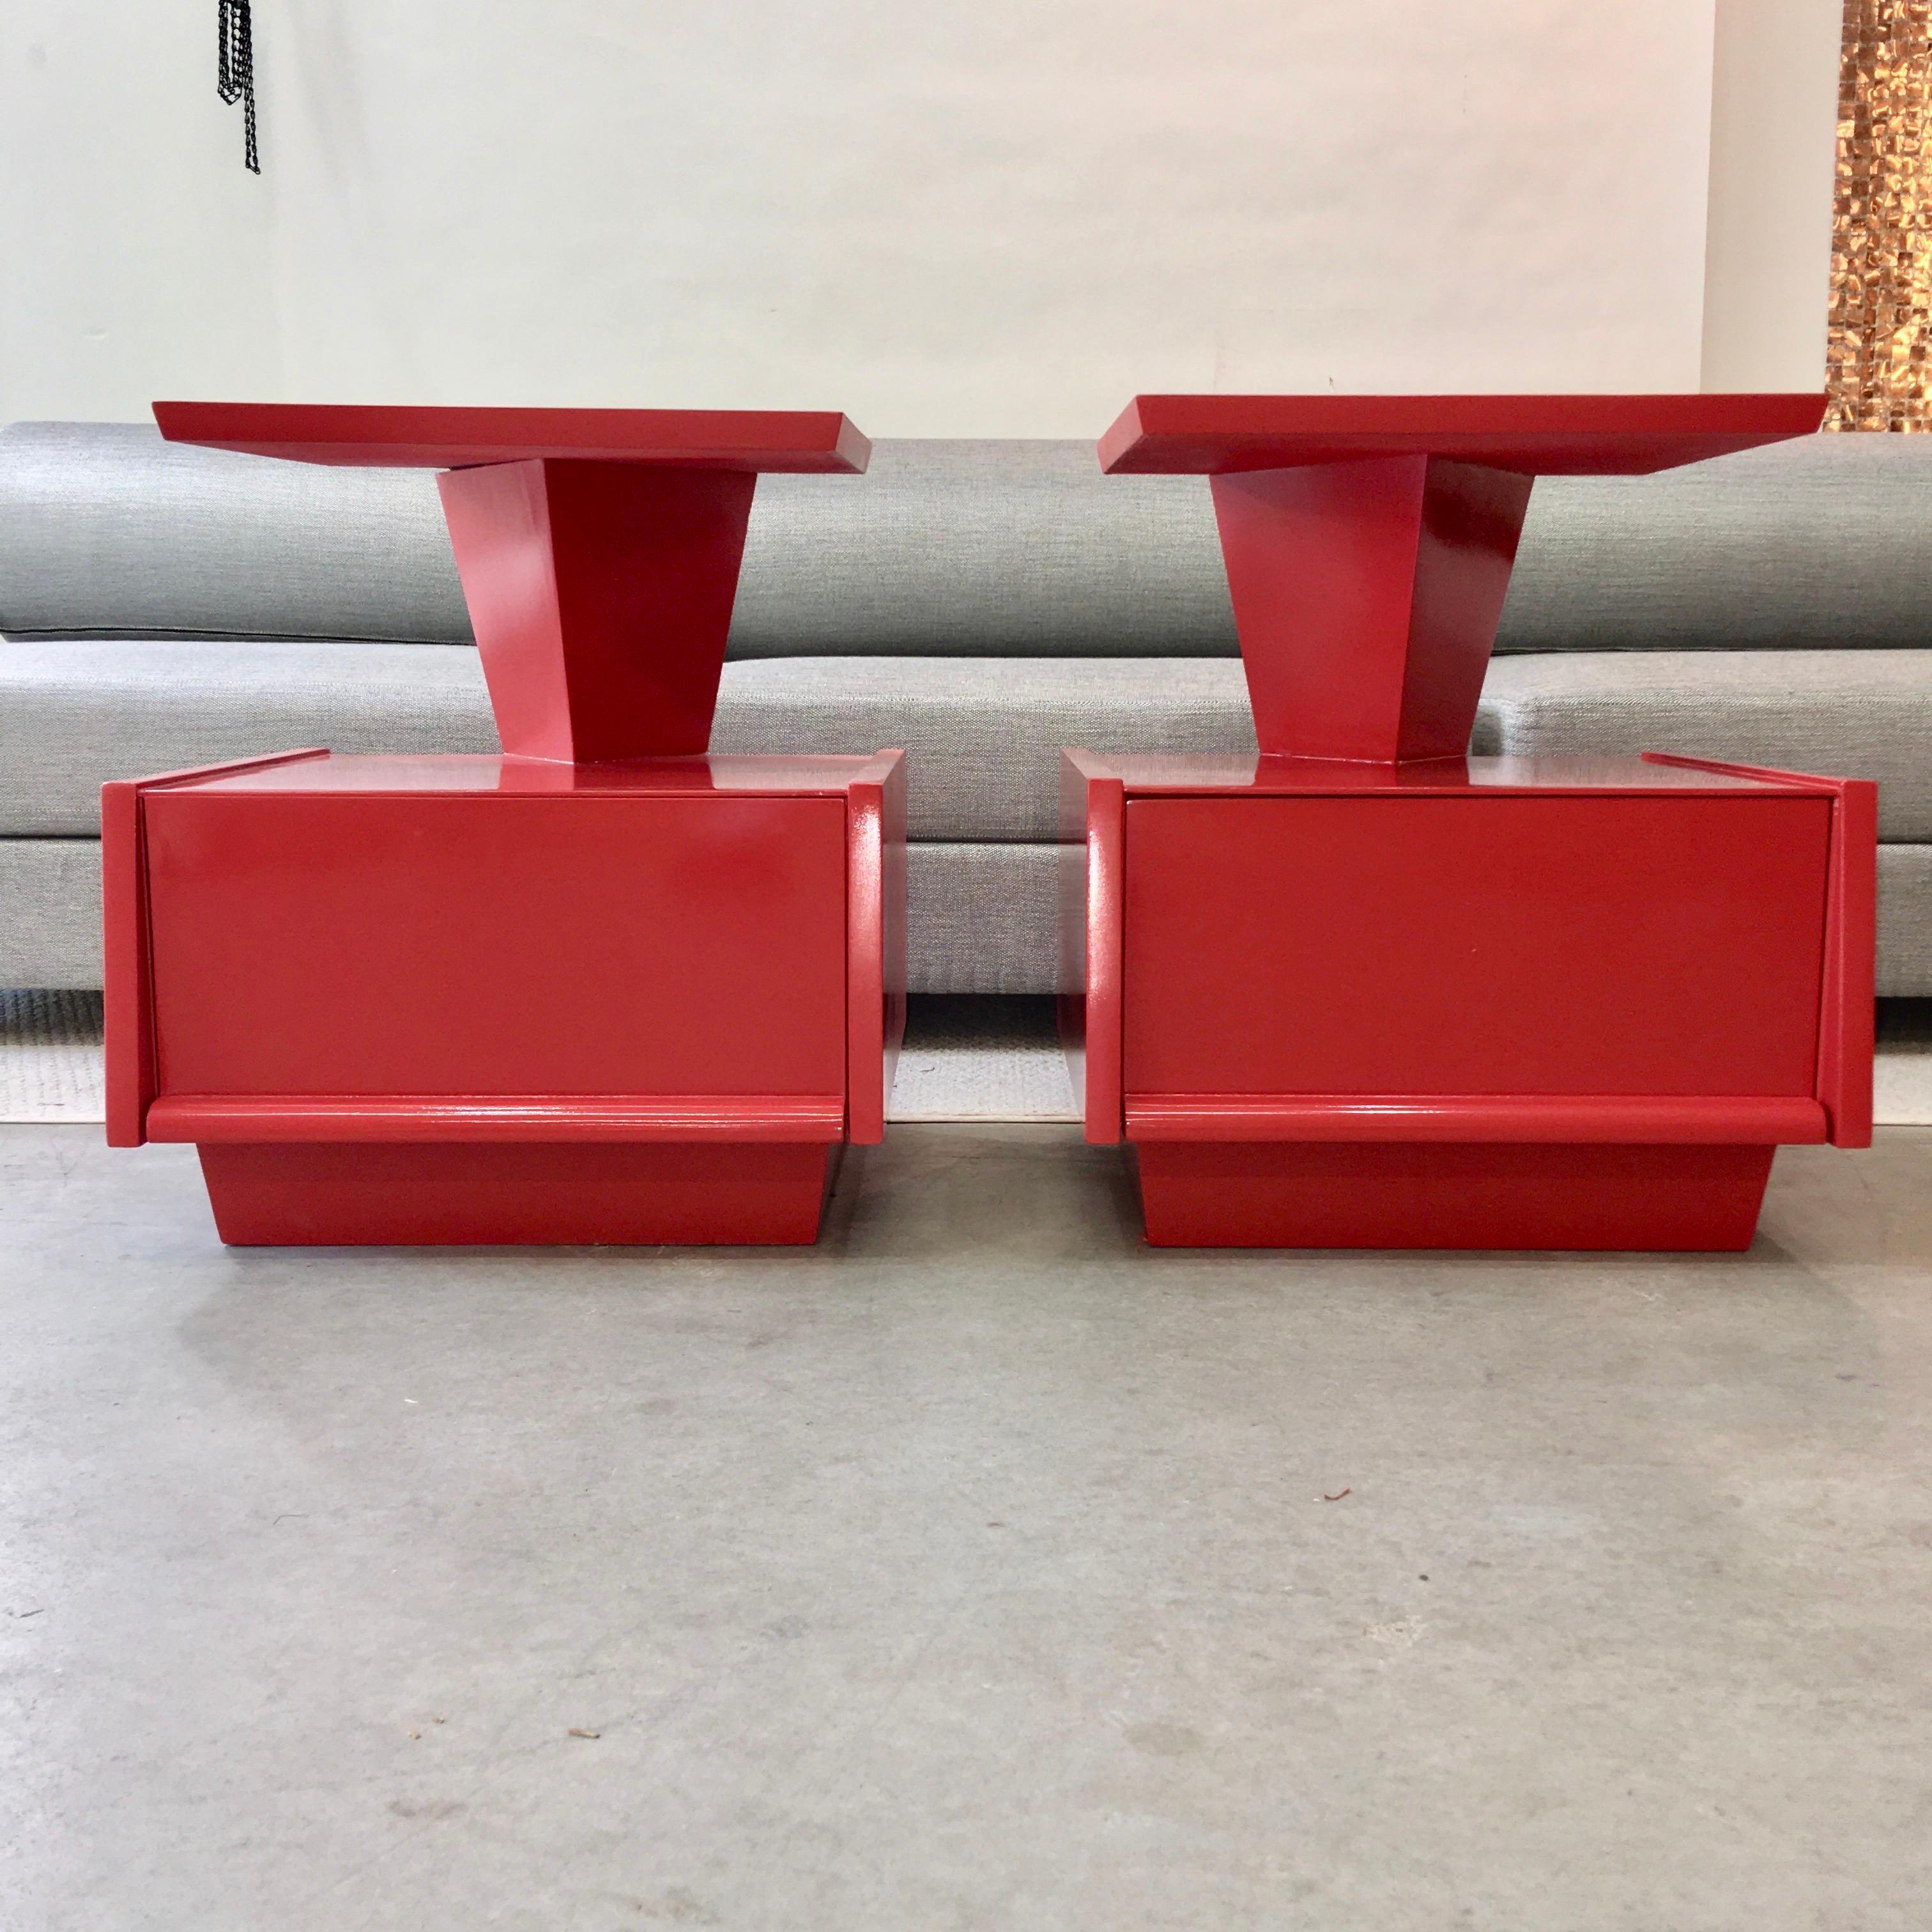 American Pair of Futuristic 1950s Lacquered Nightstands by Mengel